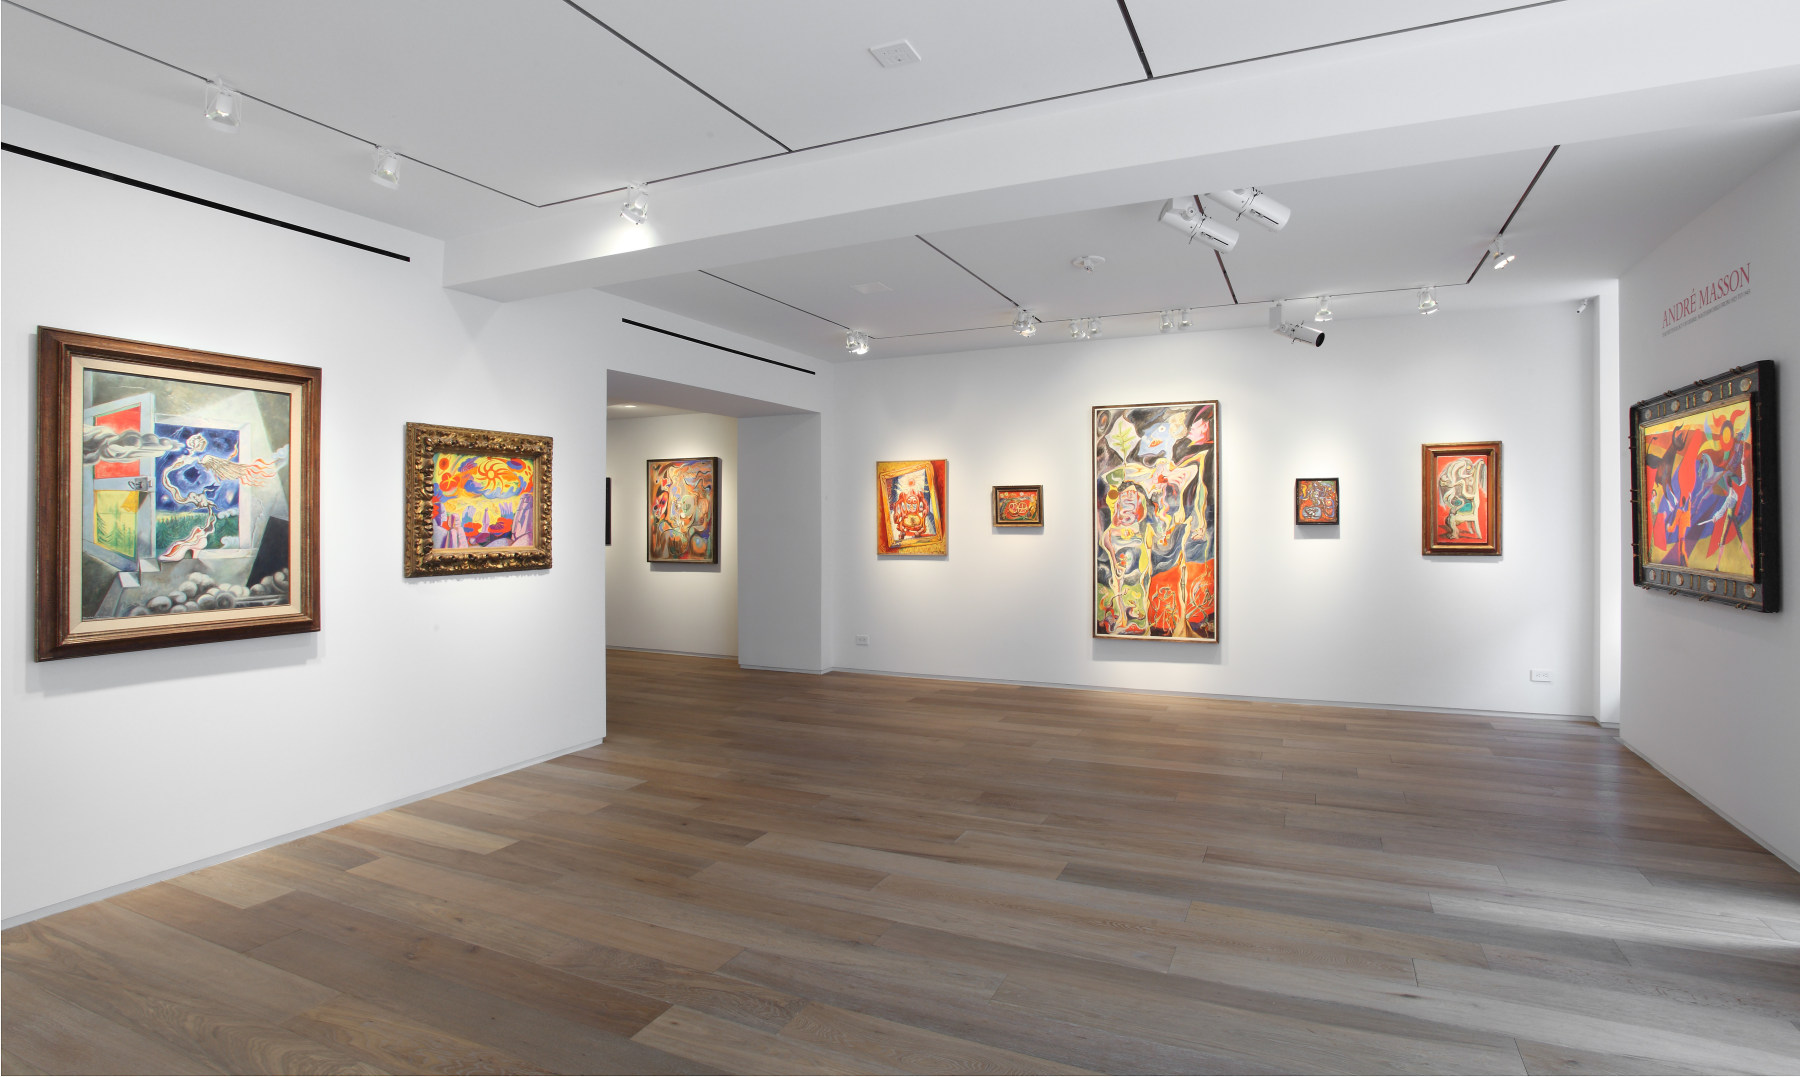 Andr&eacute; Masson, Installation View